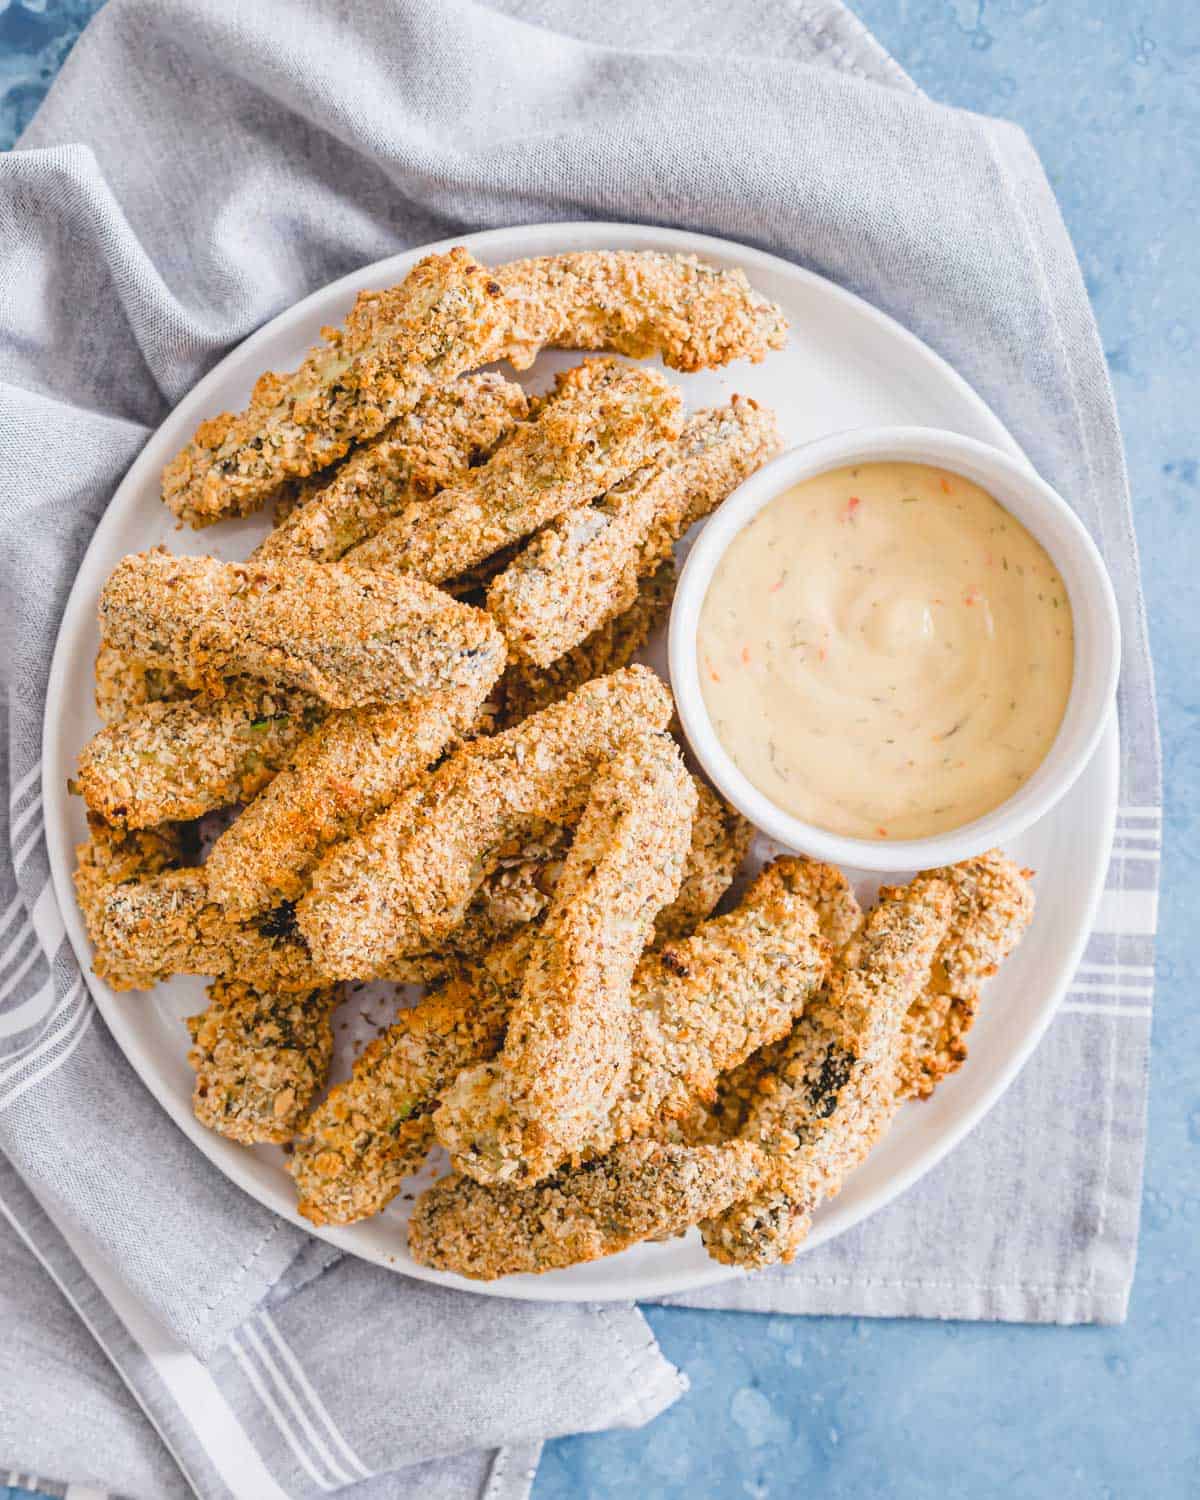 Healthy vegan "fried" zucchini fries made in the oven on a plate with dipping sauce on the side.